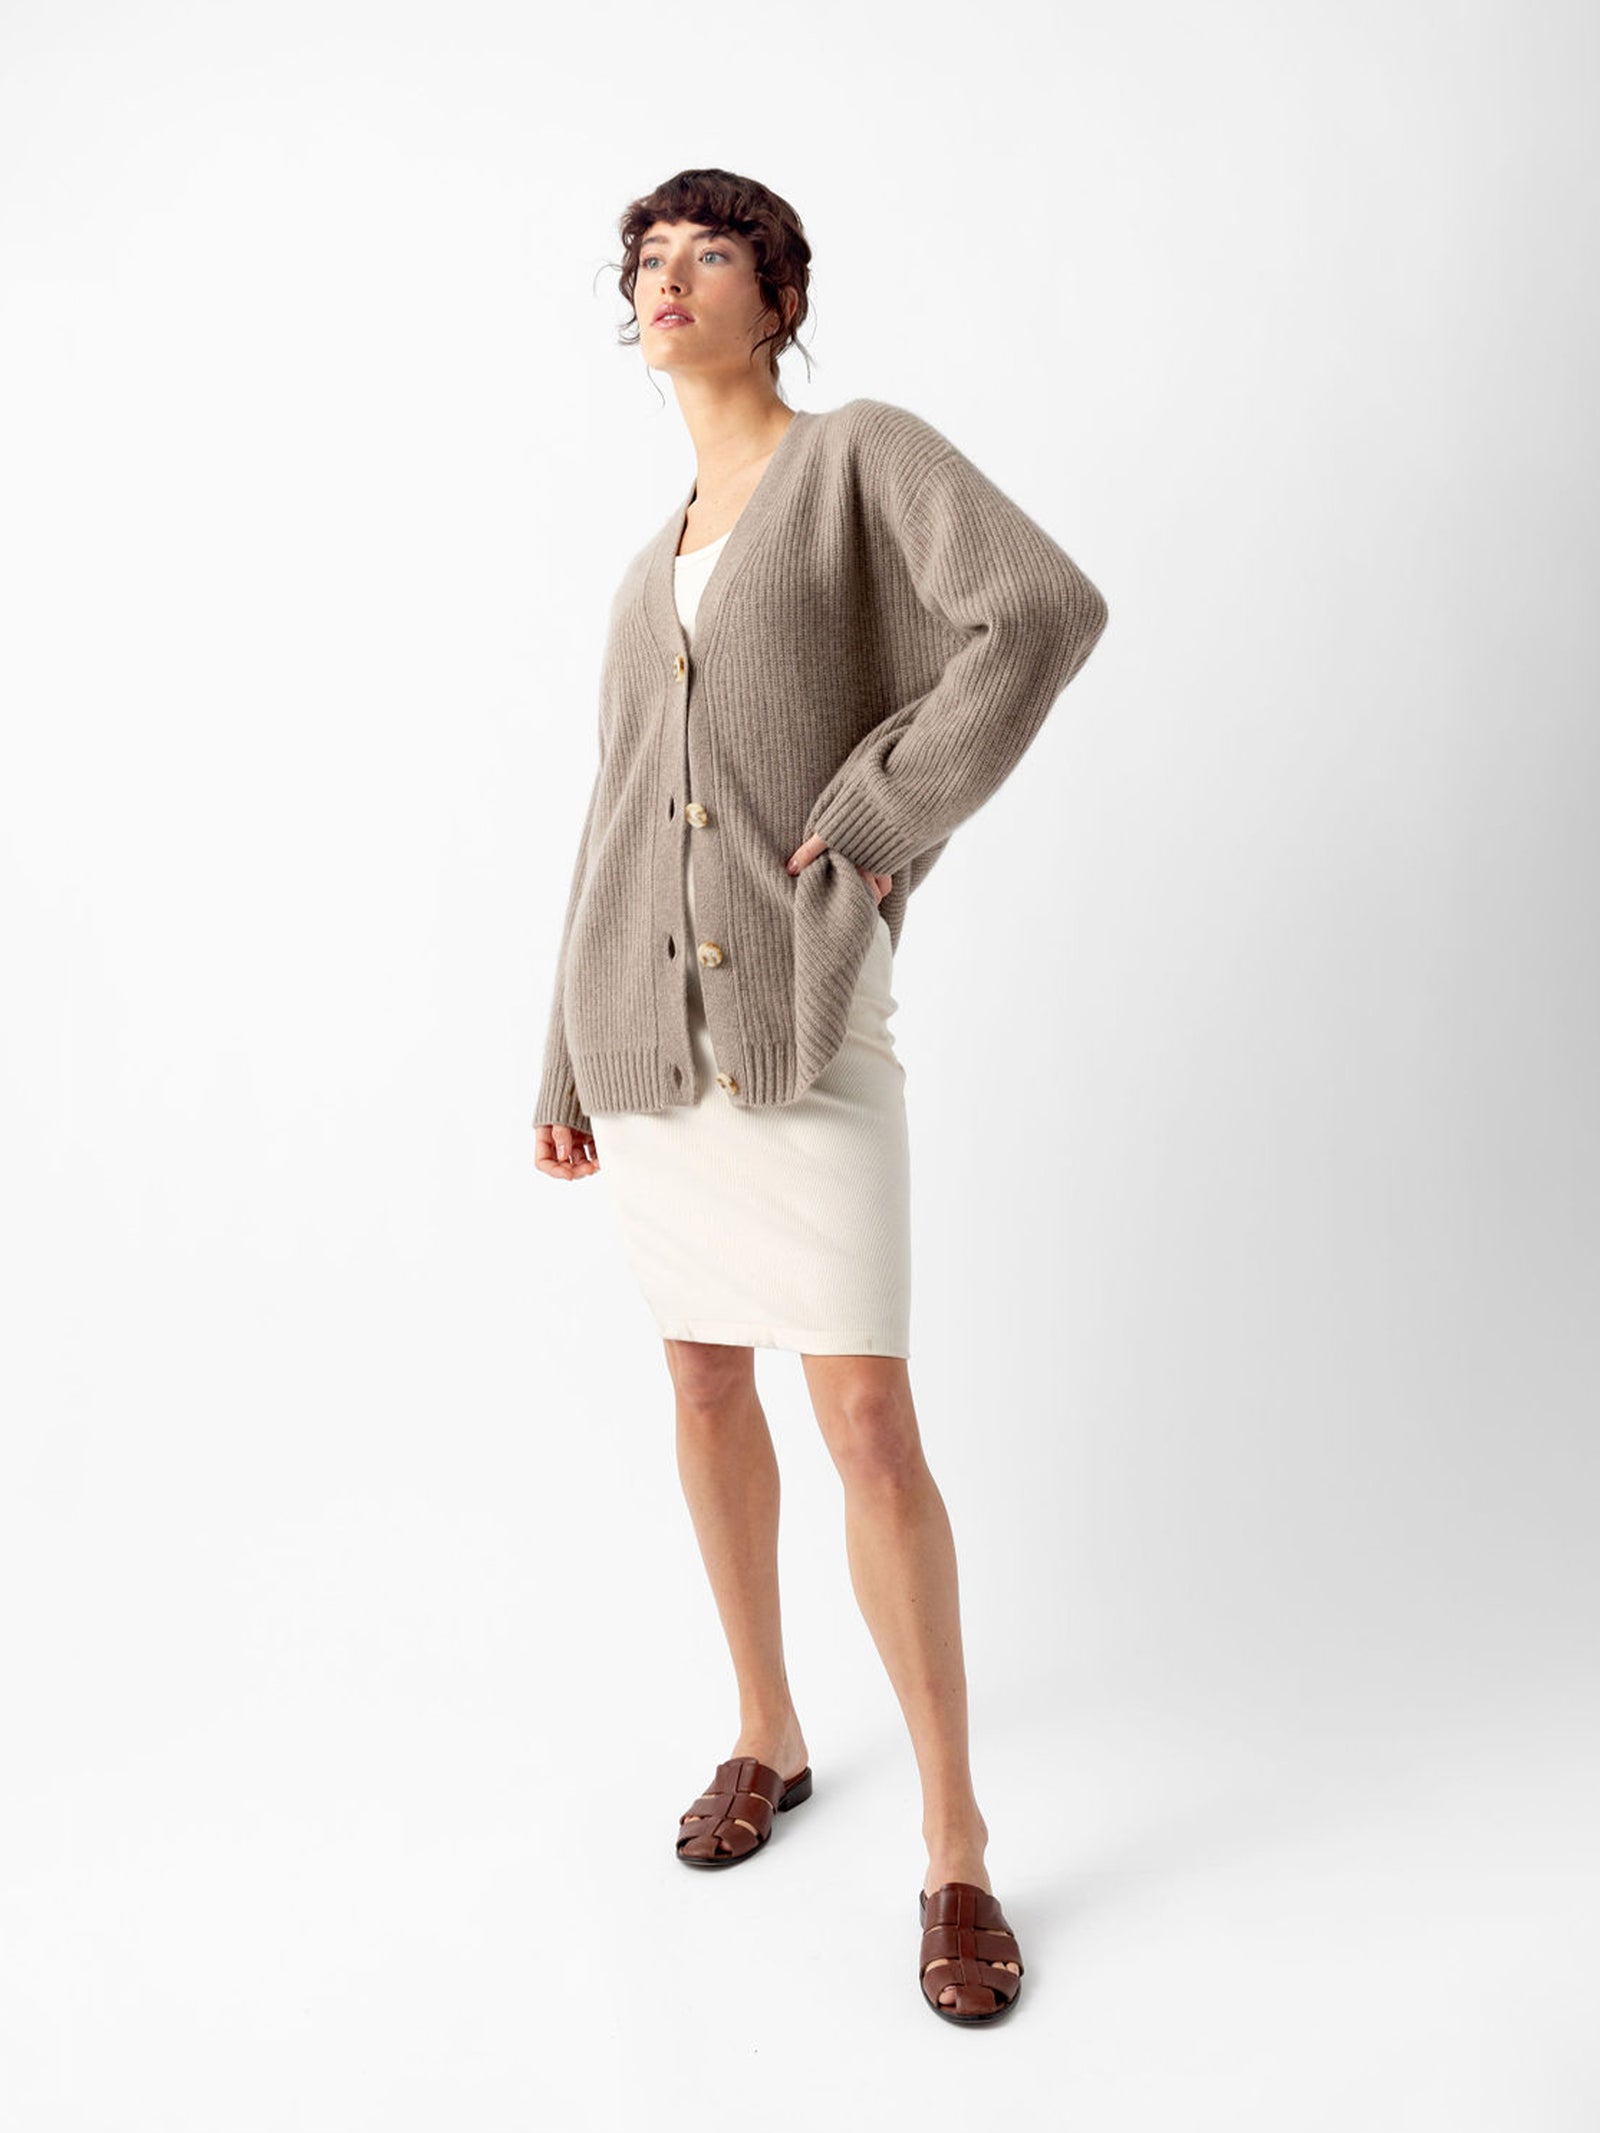 Woman in almond sunday cardigan over white dress with white background 